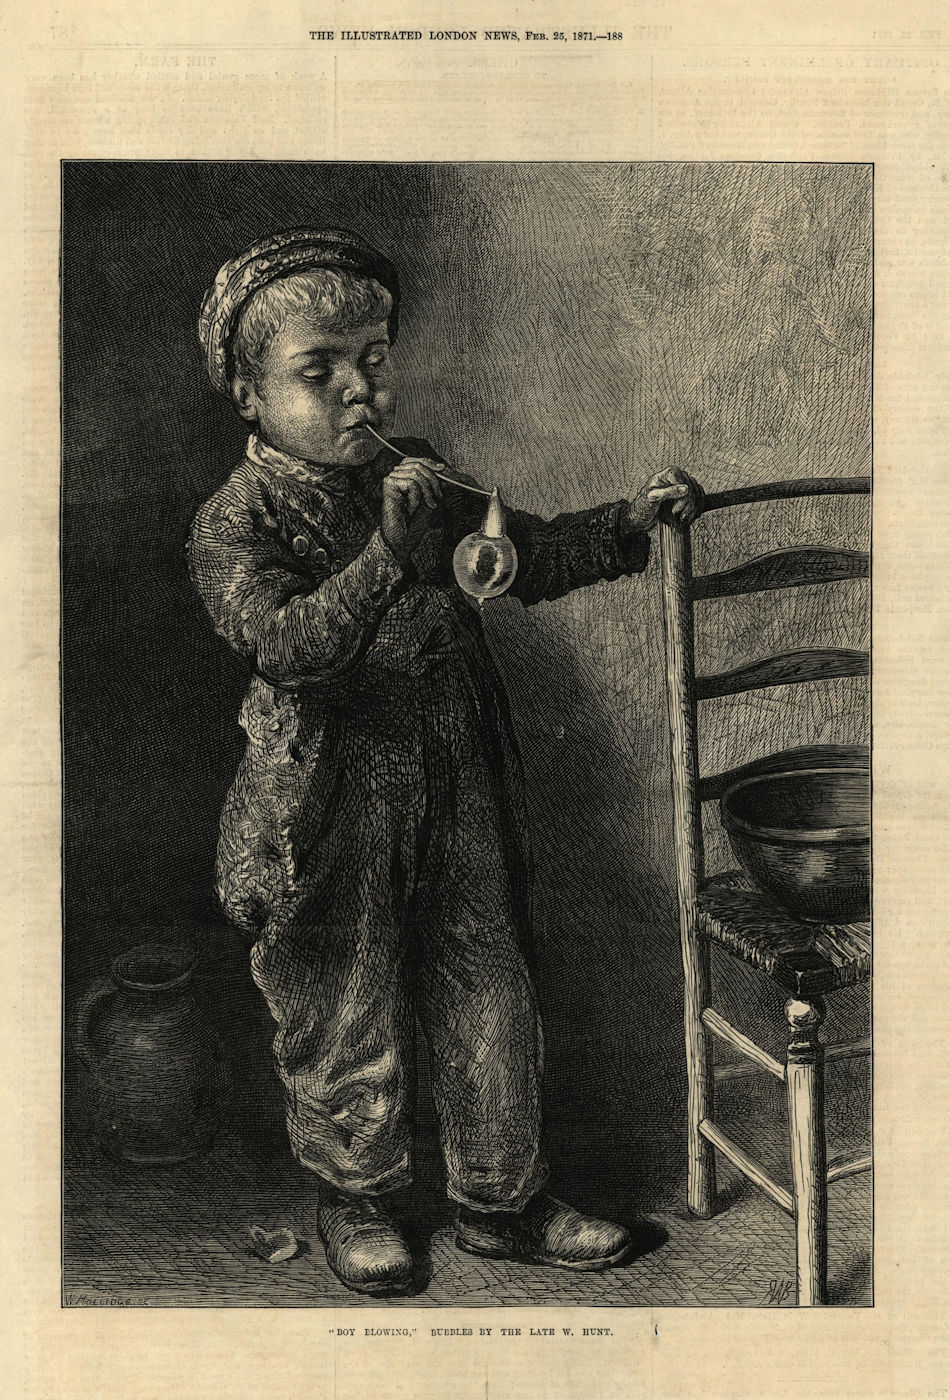 "Boy blowing bubbles", by the late W. Hunt. Children. Hunting 1871 old print